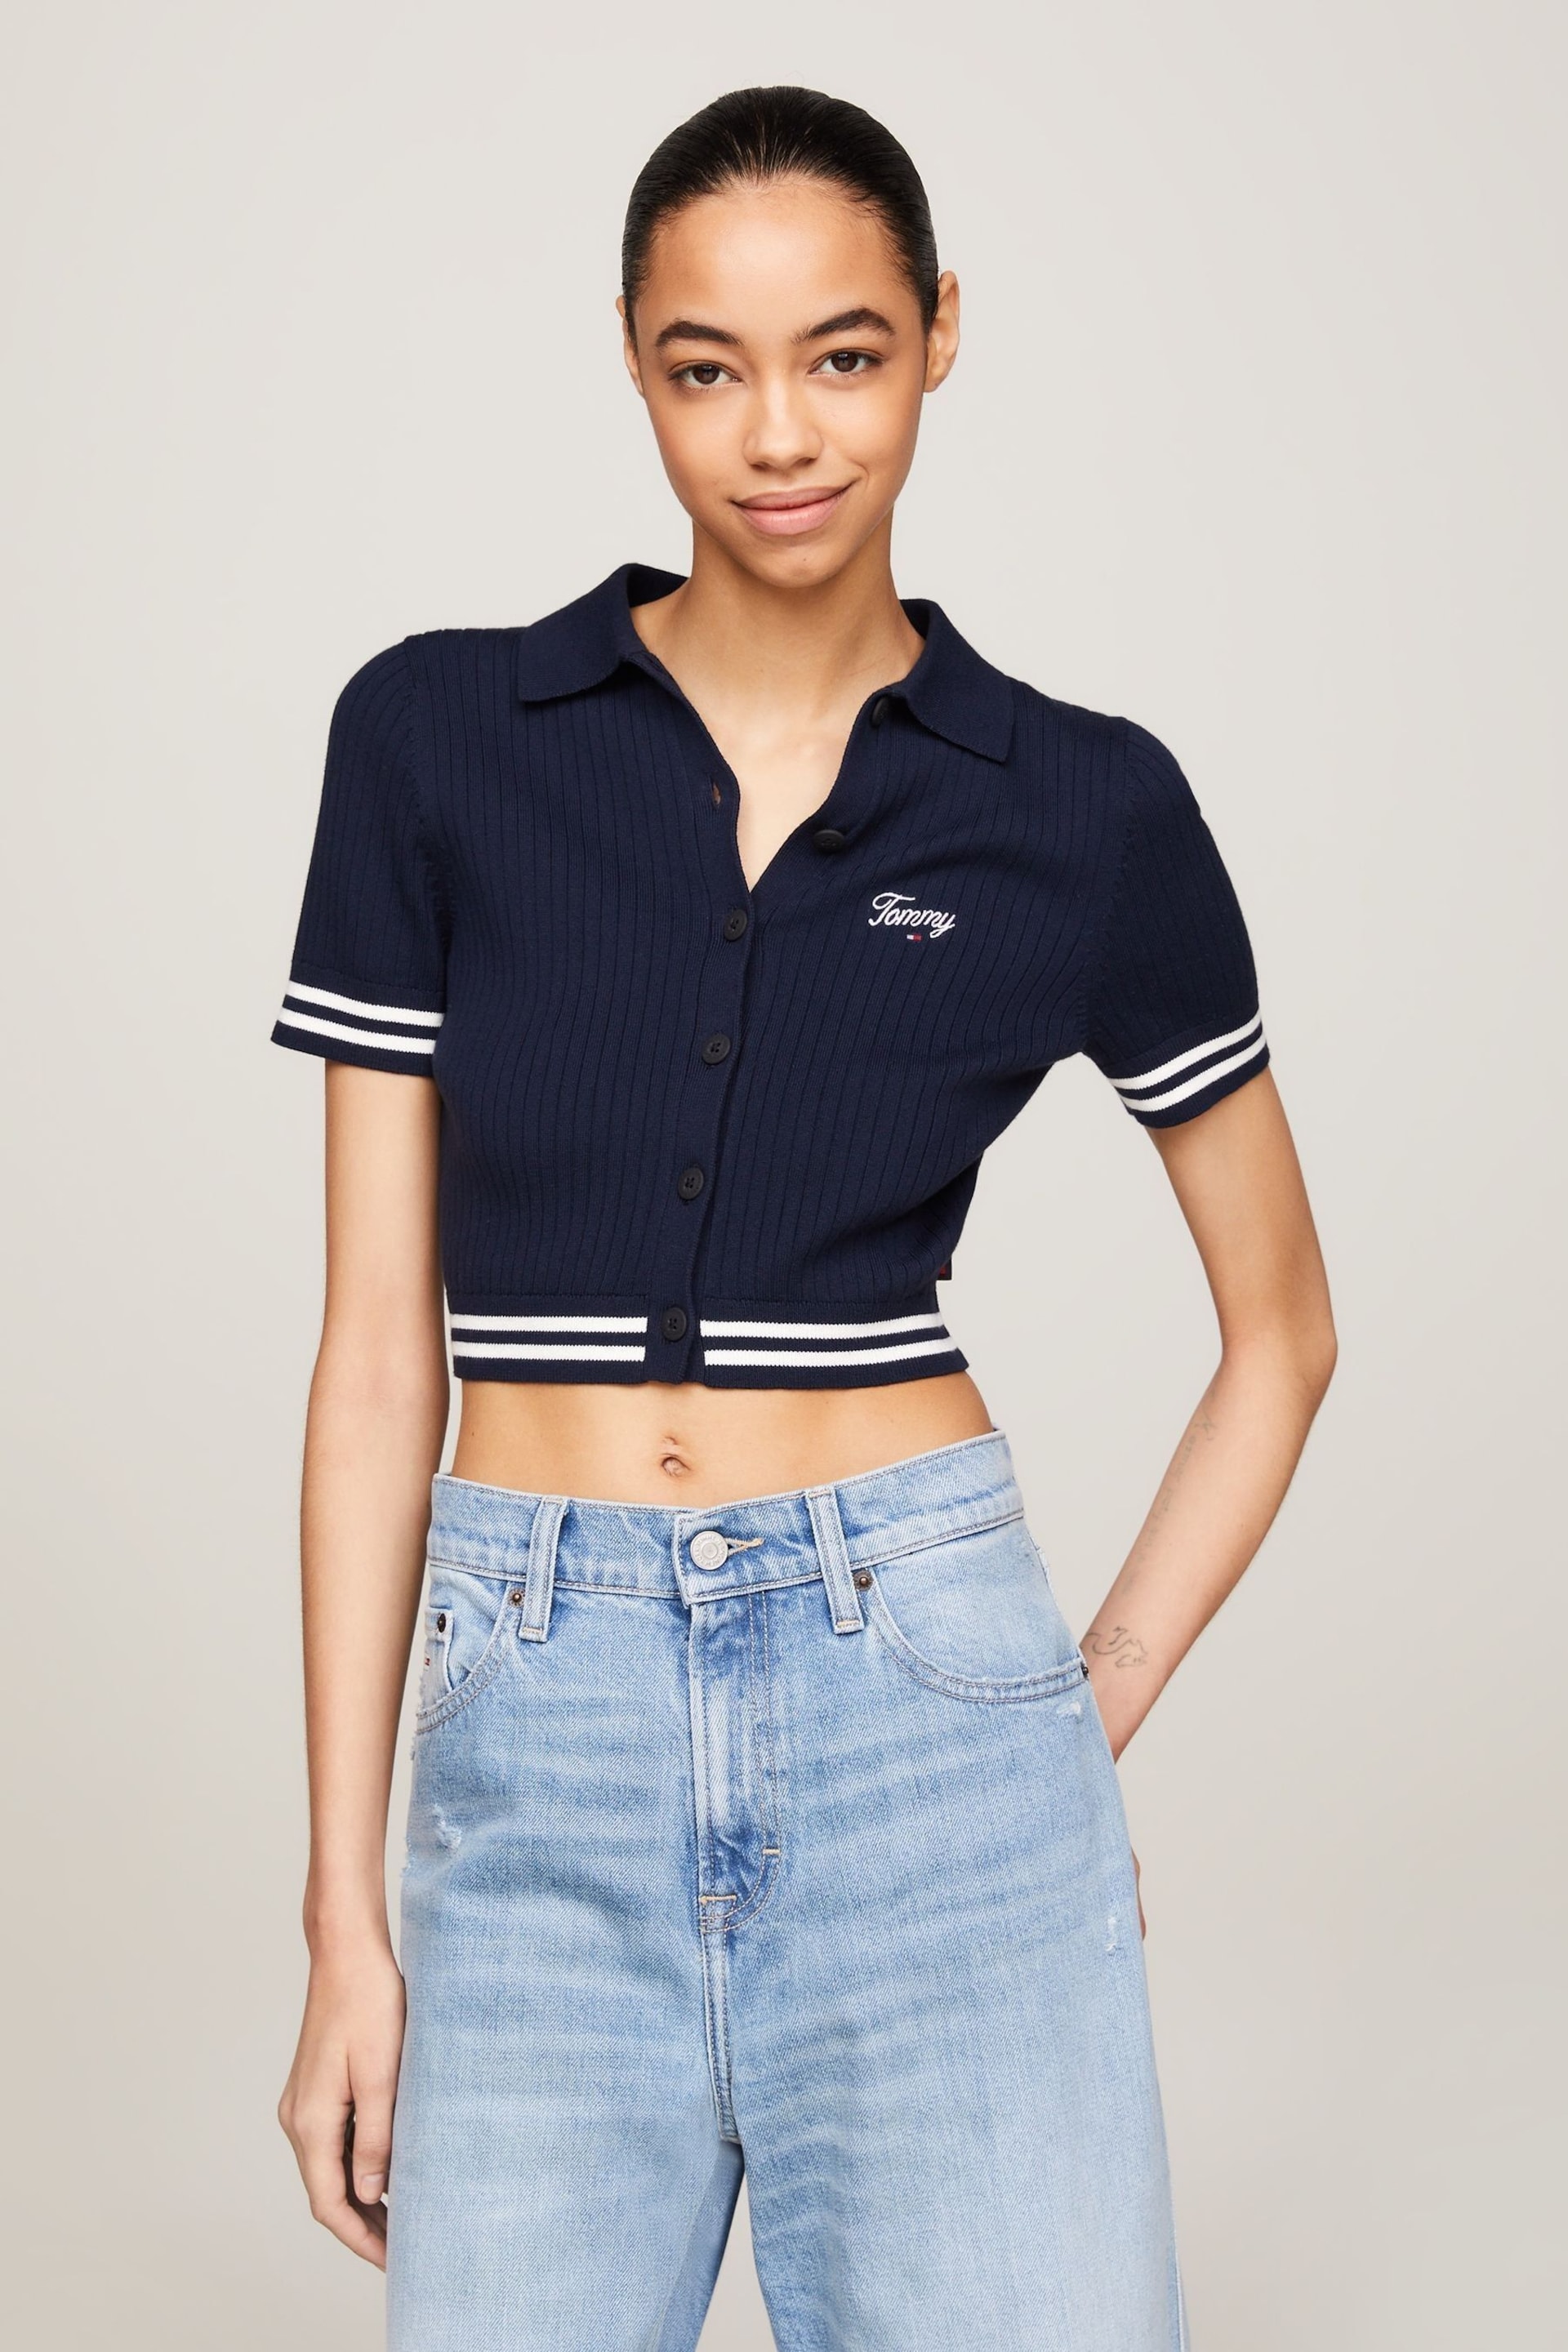 Tommy Jeans Blue Script Rib Polo Sweater - Image 1 of 6